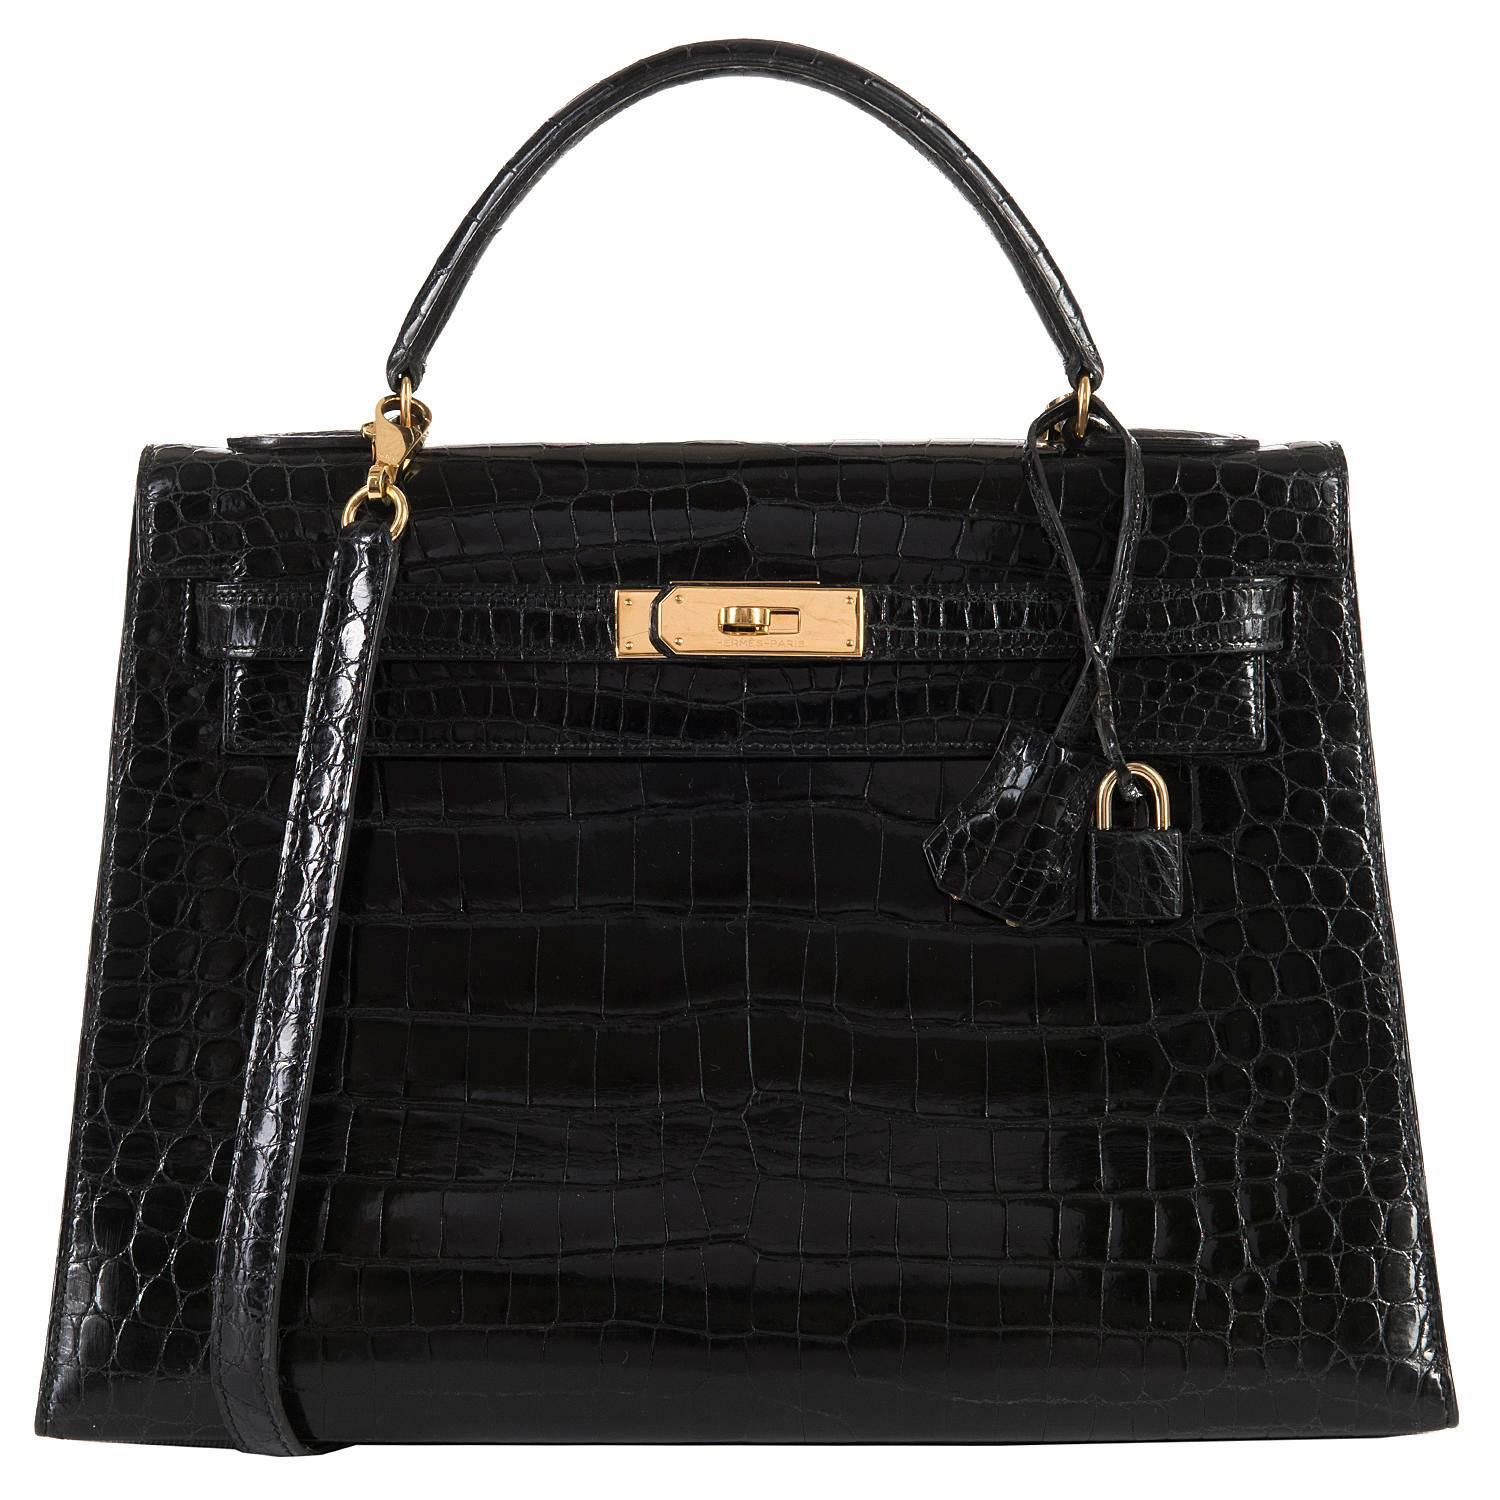 This Rare Hermes Black Crocodile Kelly Bag is in pristine condition throughout.The interior is finish in Black Chèvre leather and has a full length zipped pocket, with an open pocket to the other side. Fitted with a detachable shoulder strap, the